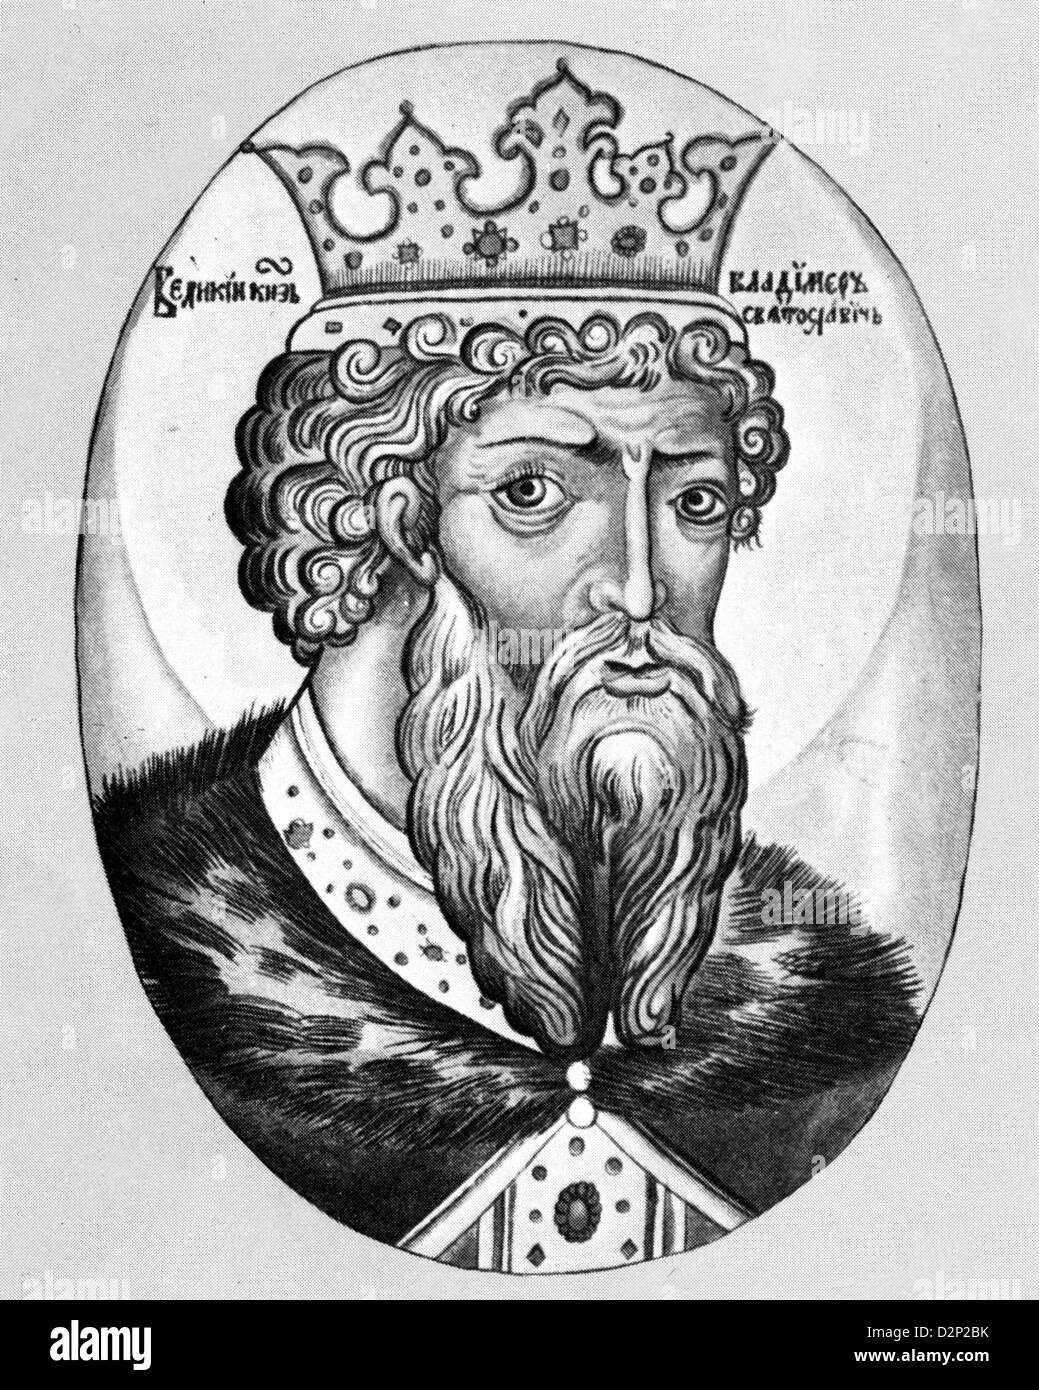 ST. VLADIMIR THE GREAT (c 958-1015) Grand Prince of Kiev in a 17th century illustration Stock Photo